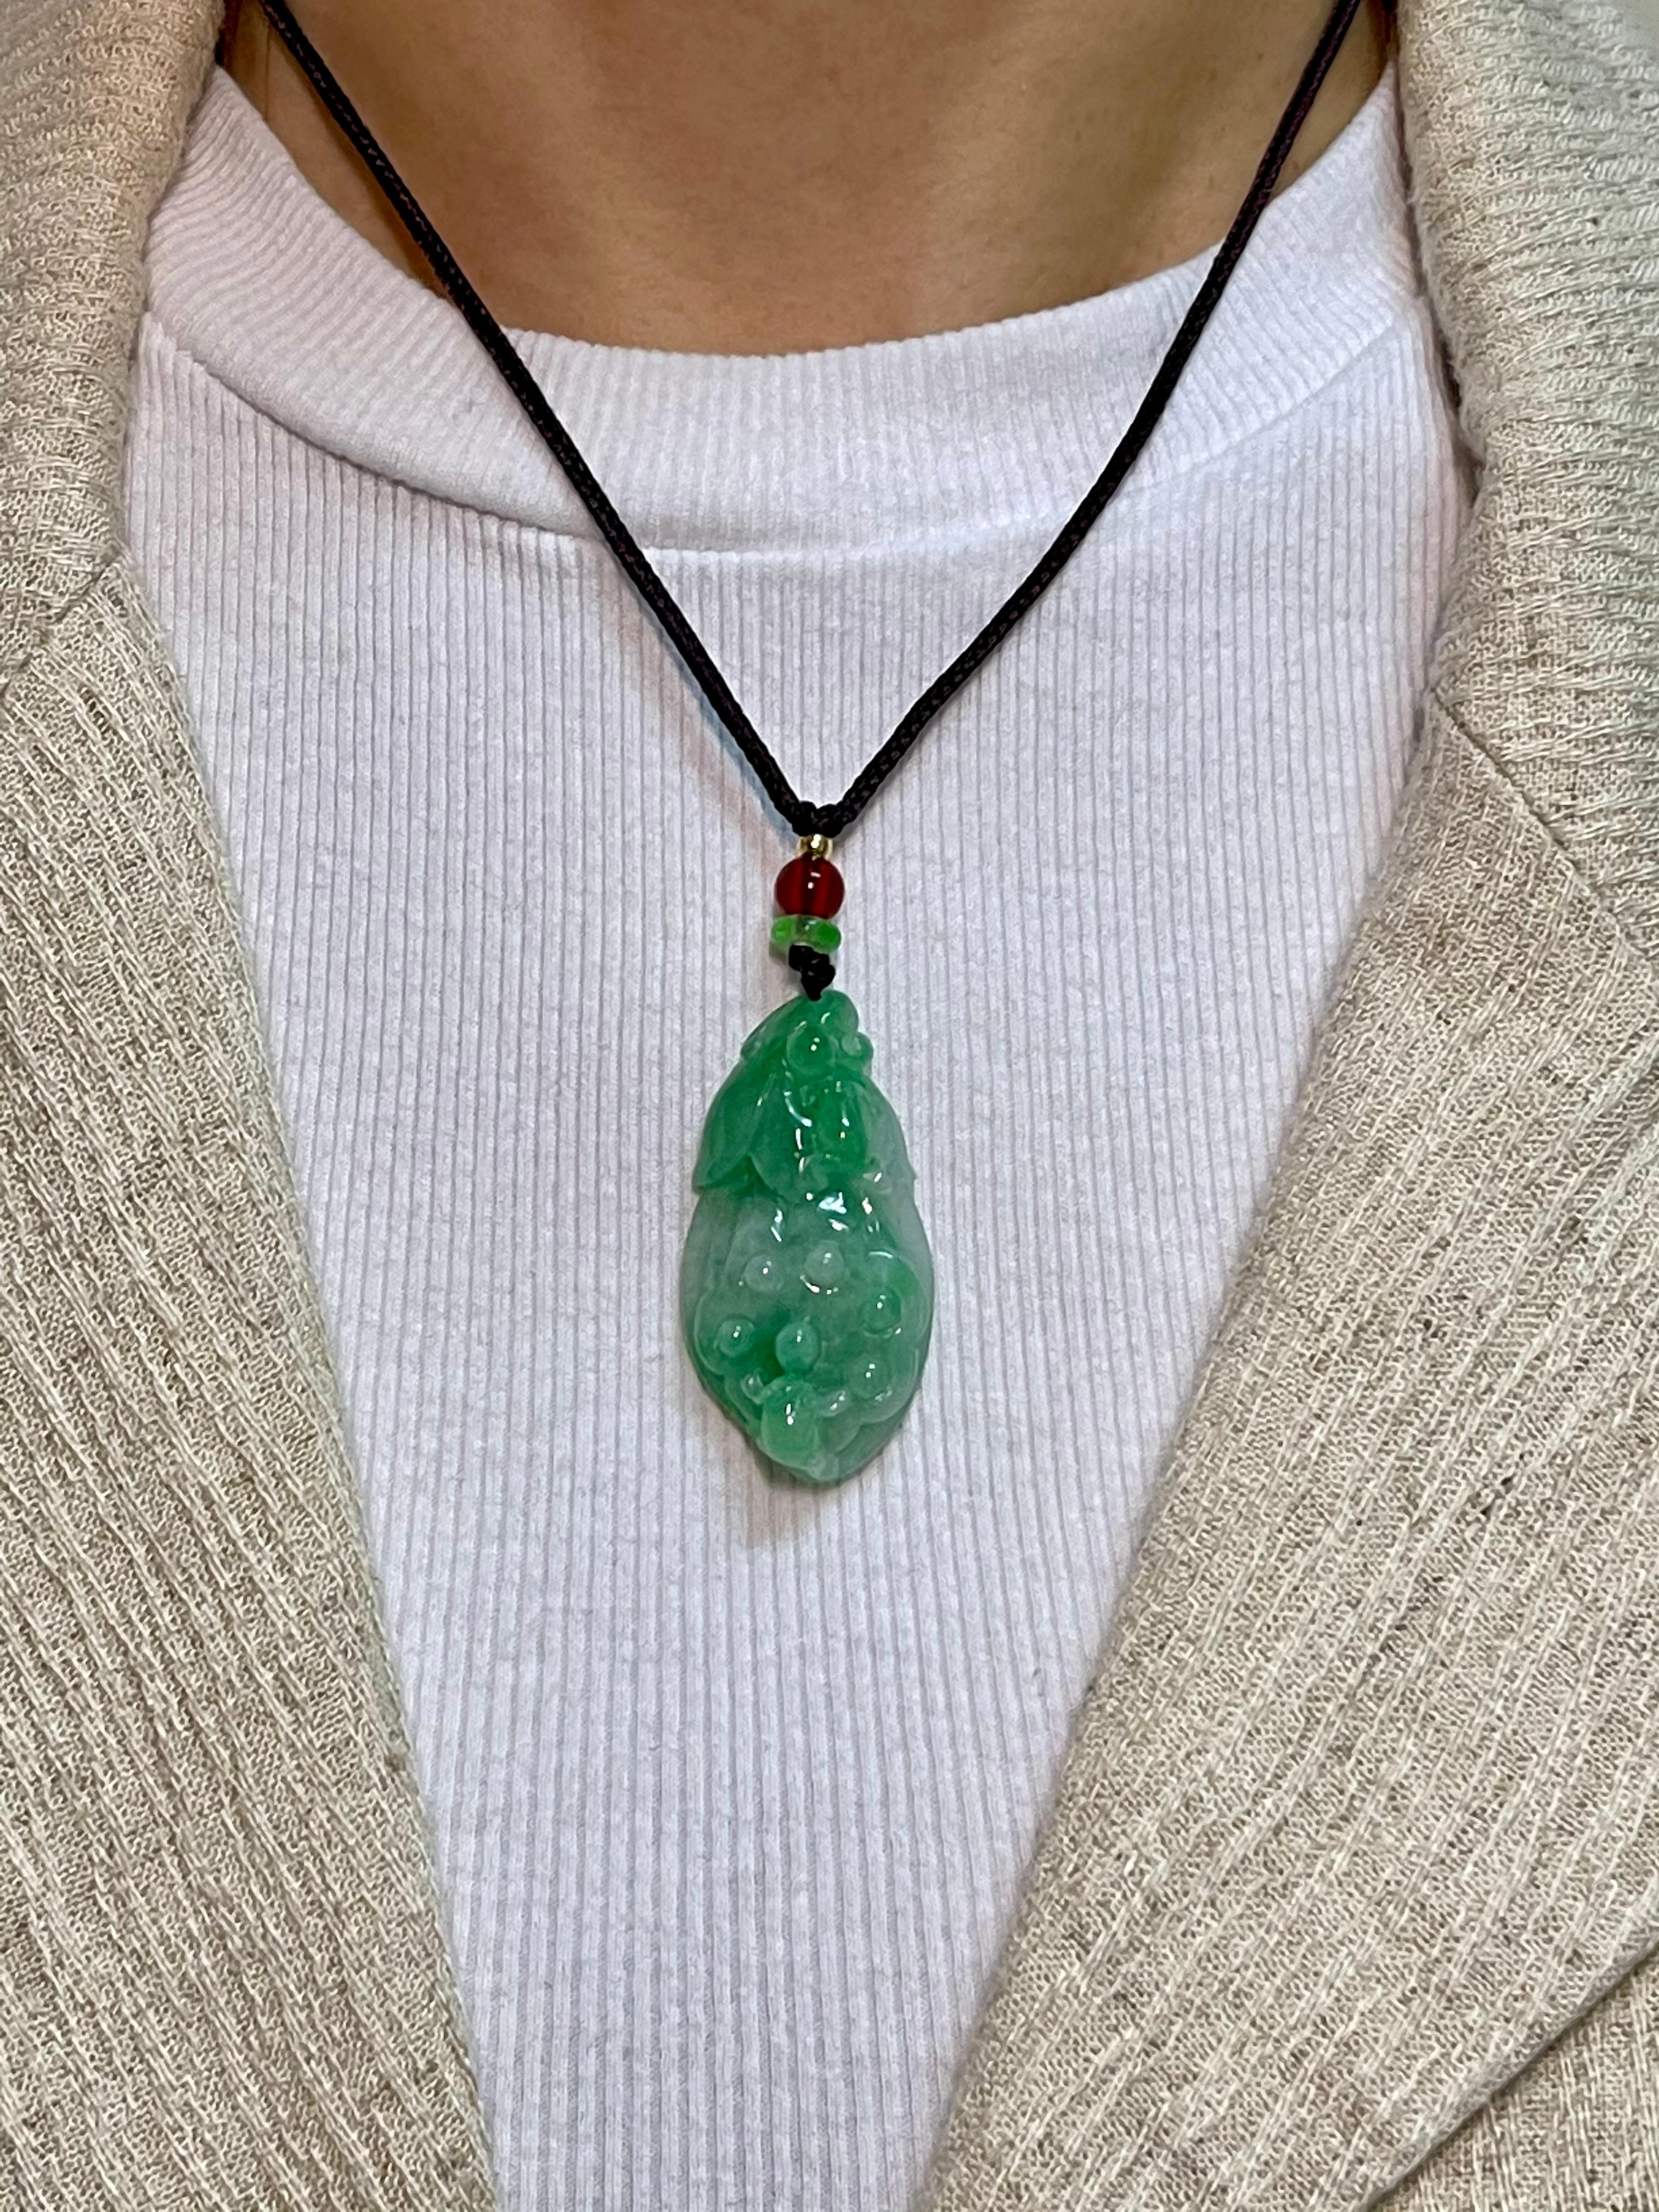 Please check out the HD video. This is certified natural jadeite jade by two labs. The jade carving depicts a Chinese vegetable which symbolizes fertility and abundance like a harvest. The apple green jade and red bead are held together with a